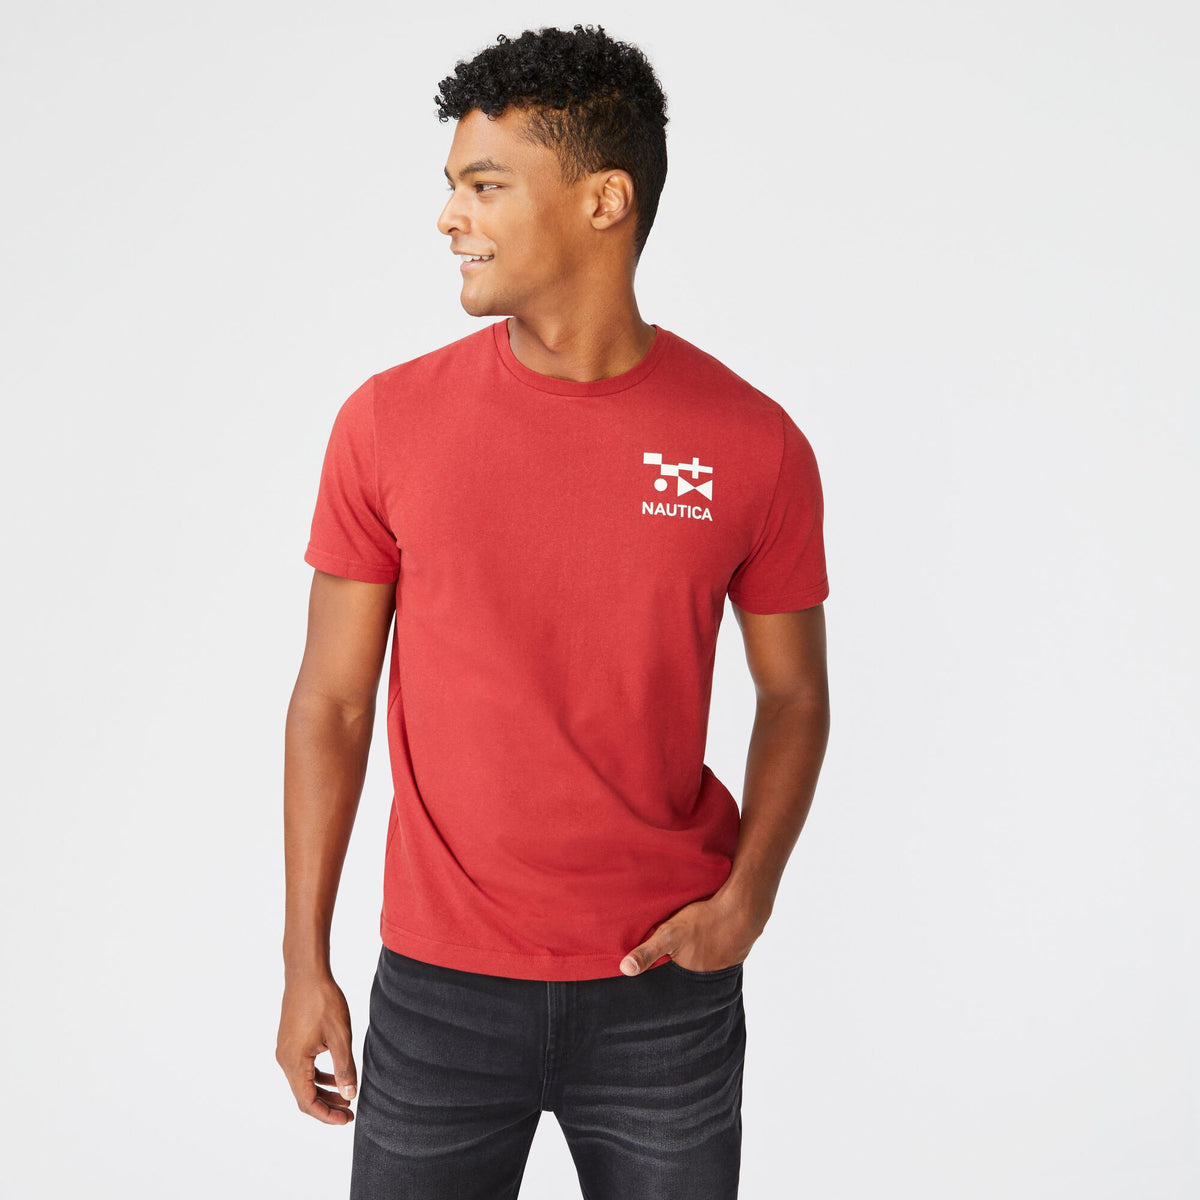  Nautica Men's Sustainably Crafted N83 Graphic T-Shirt